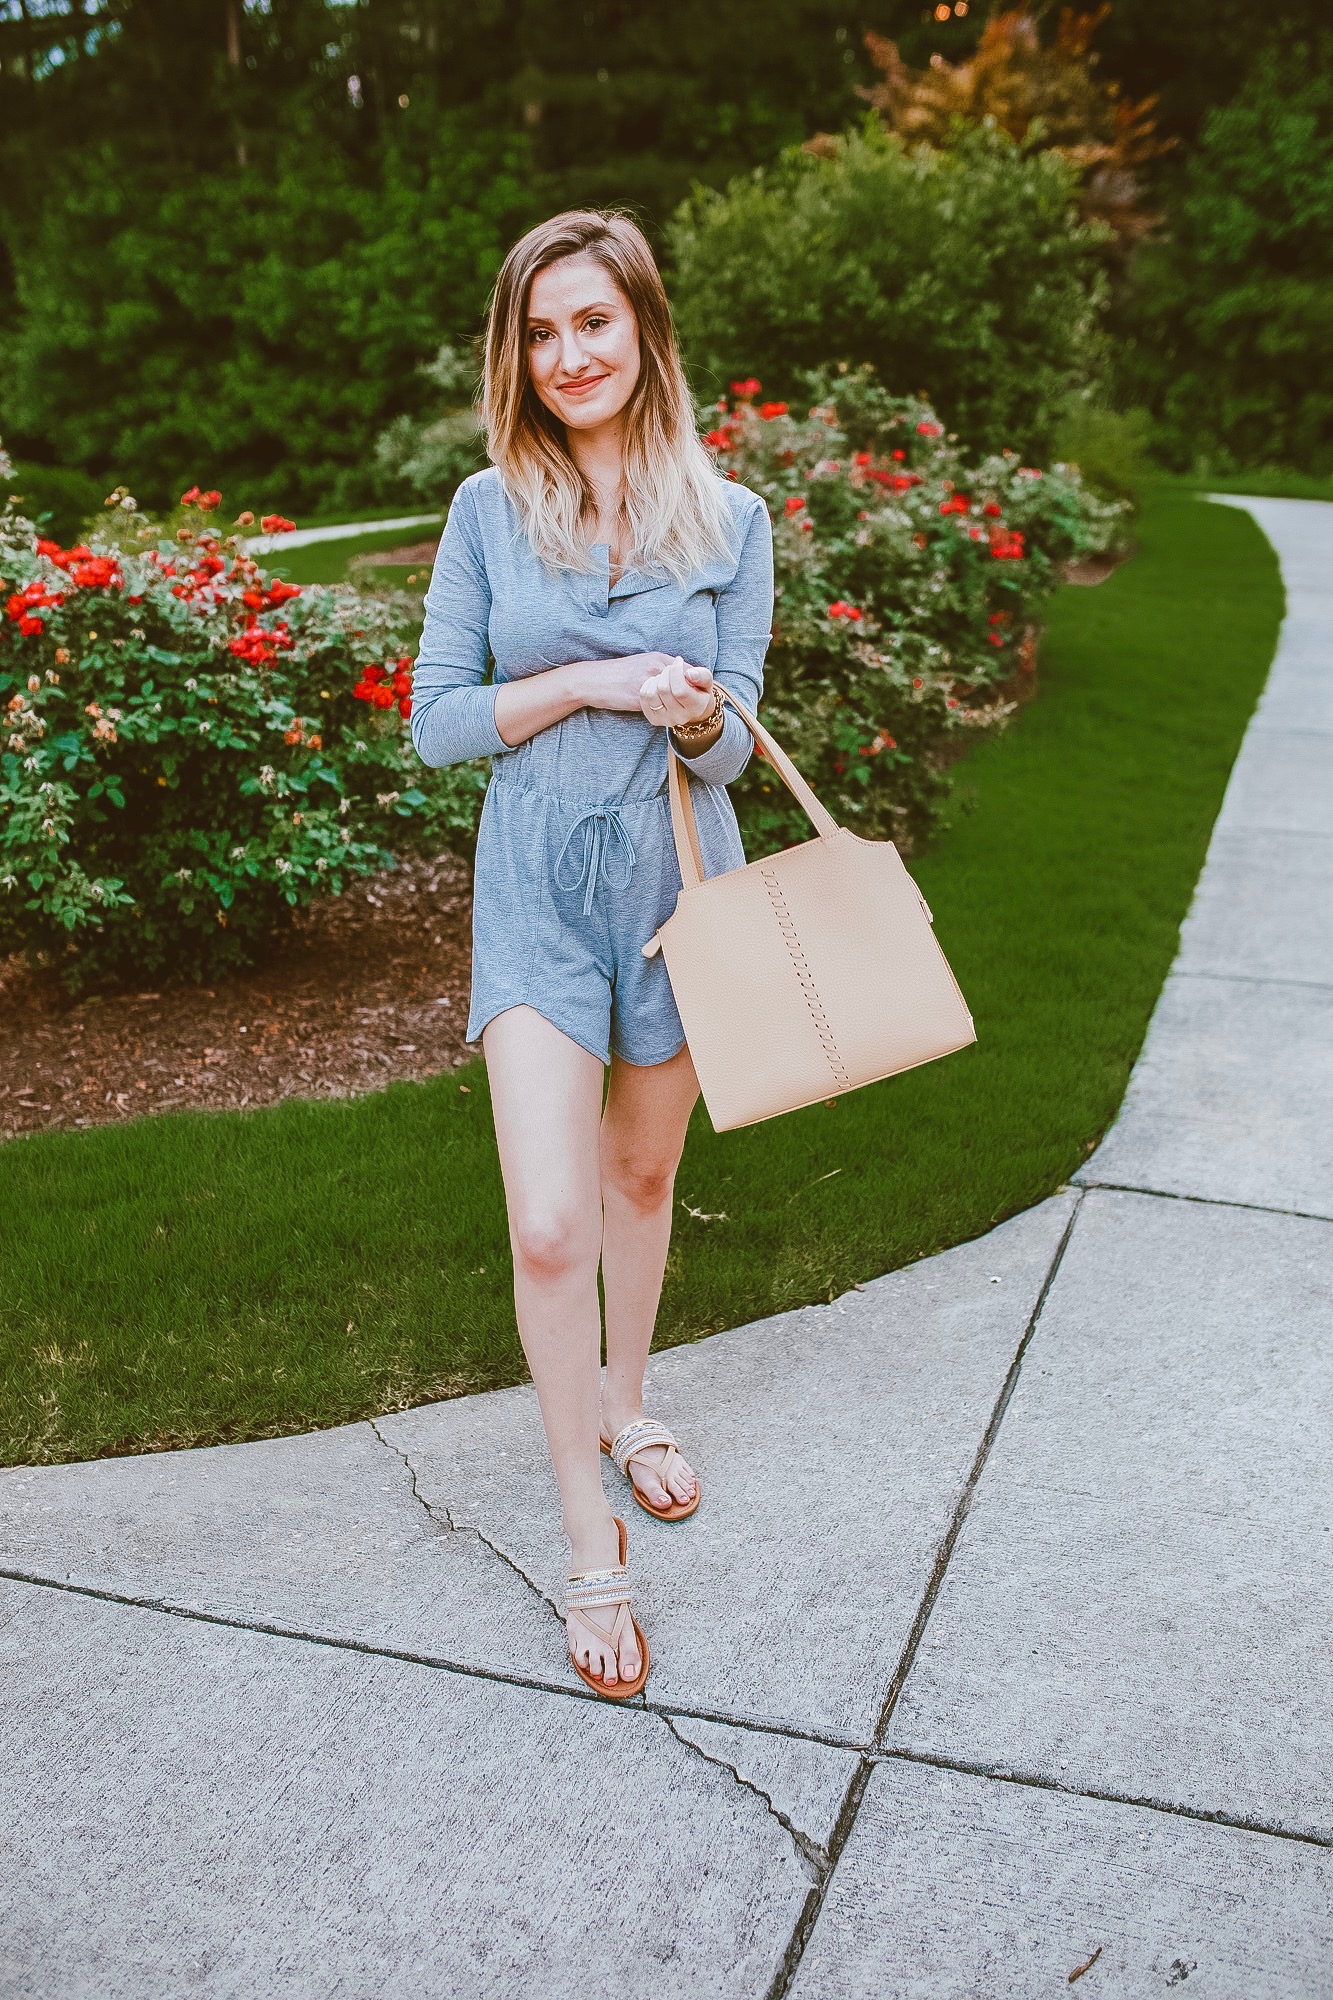 The cutest summer romper! North Carolina fashion and lifestyle blogger Jessica Linn wearing the seasons hottest trend: Rompers and jumpsuits are every stylish persons go to look this summer. This little gray romper can be purchased on copperbloom.com. Jessica styled the romper with beaded sandals, a beige tote, and teal Baublebar earrings from Target. Photo editing using Christine Andrews (Hello Fashion Blog) mobile presets.